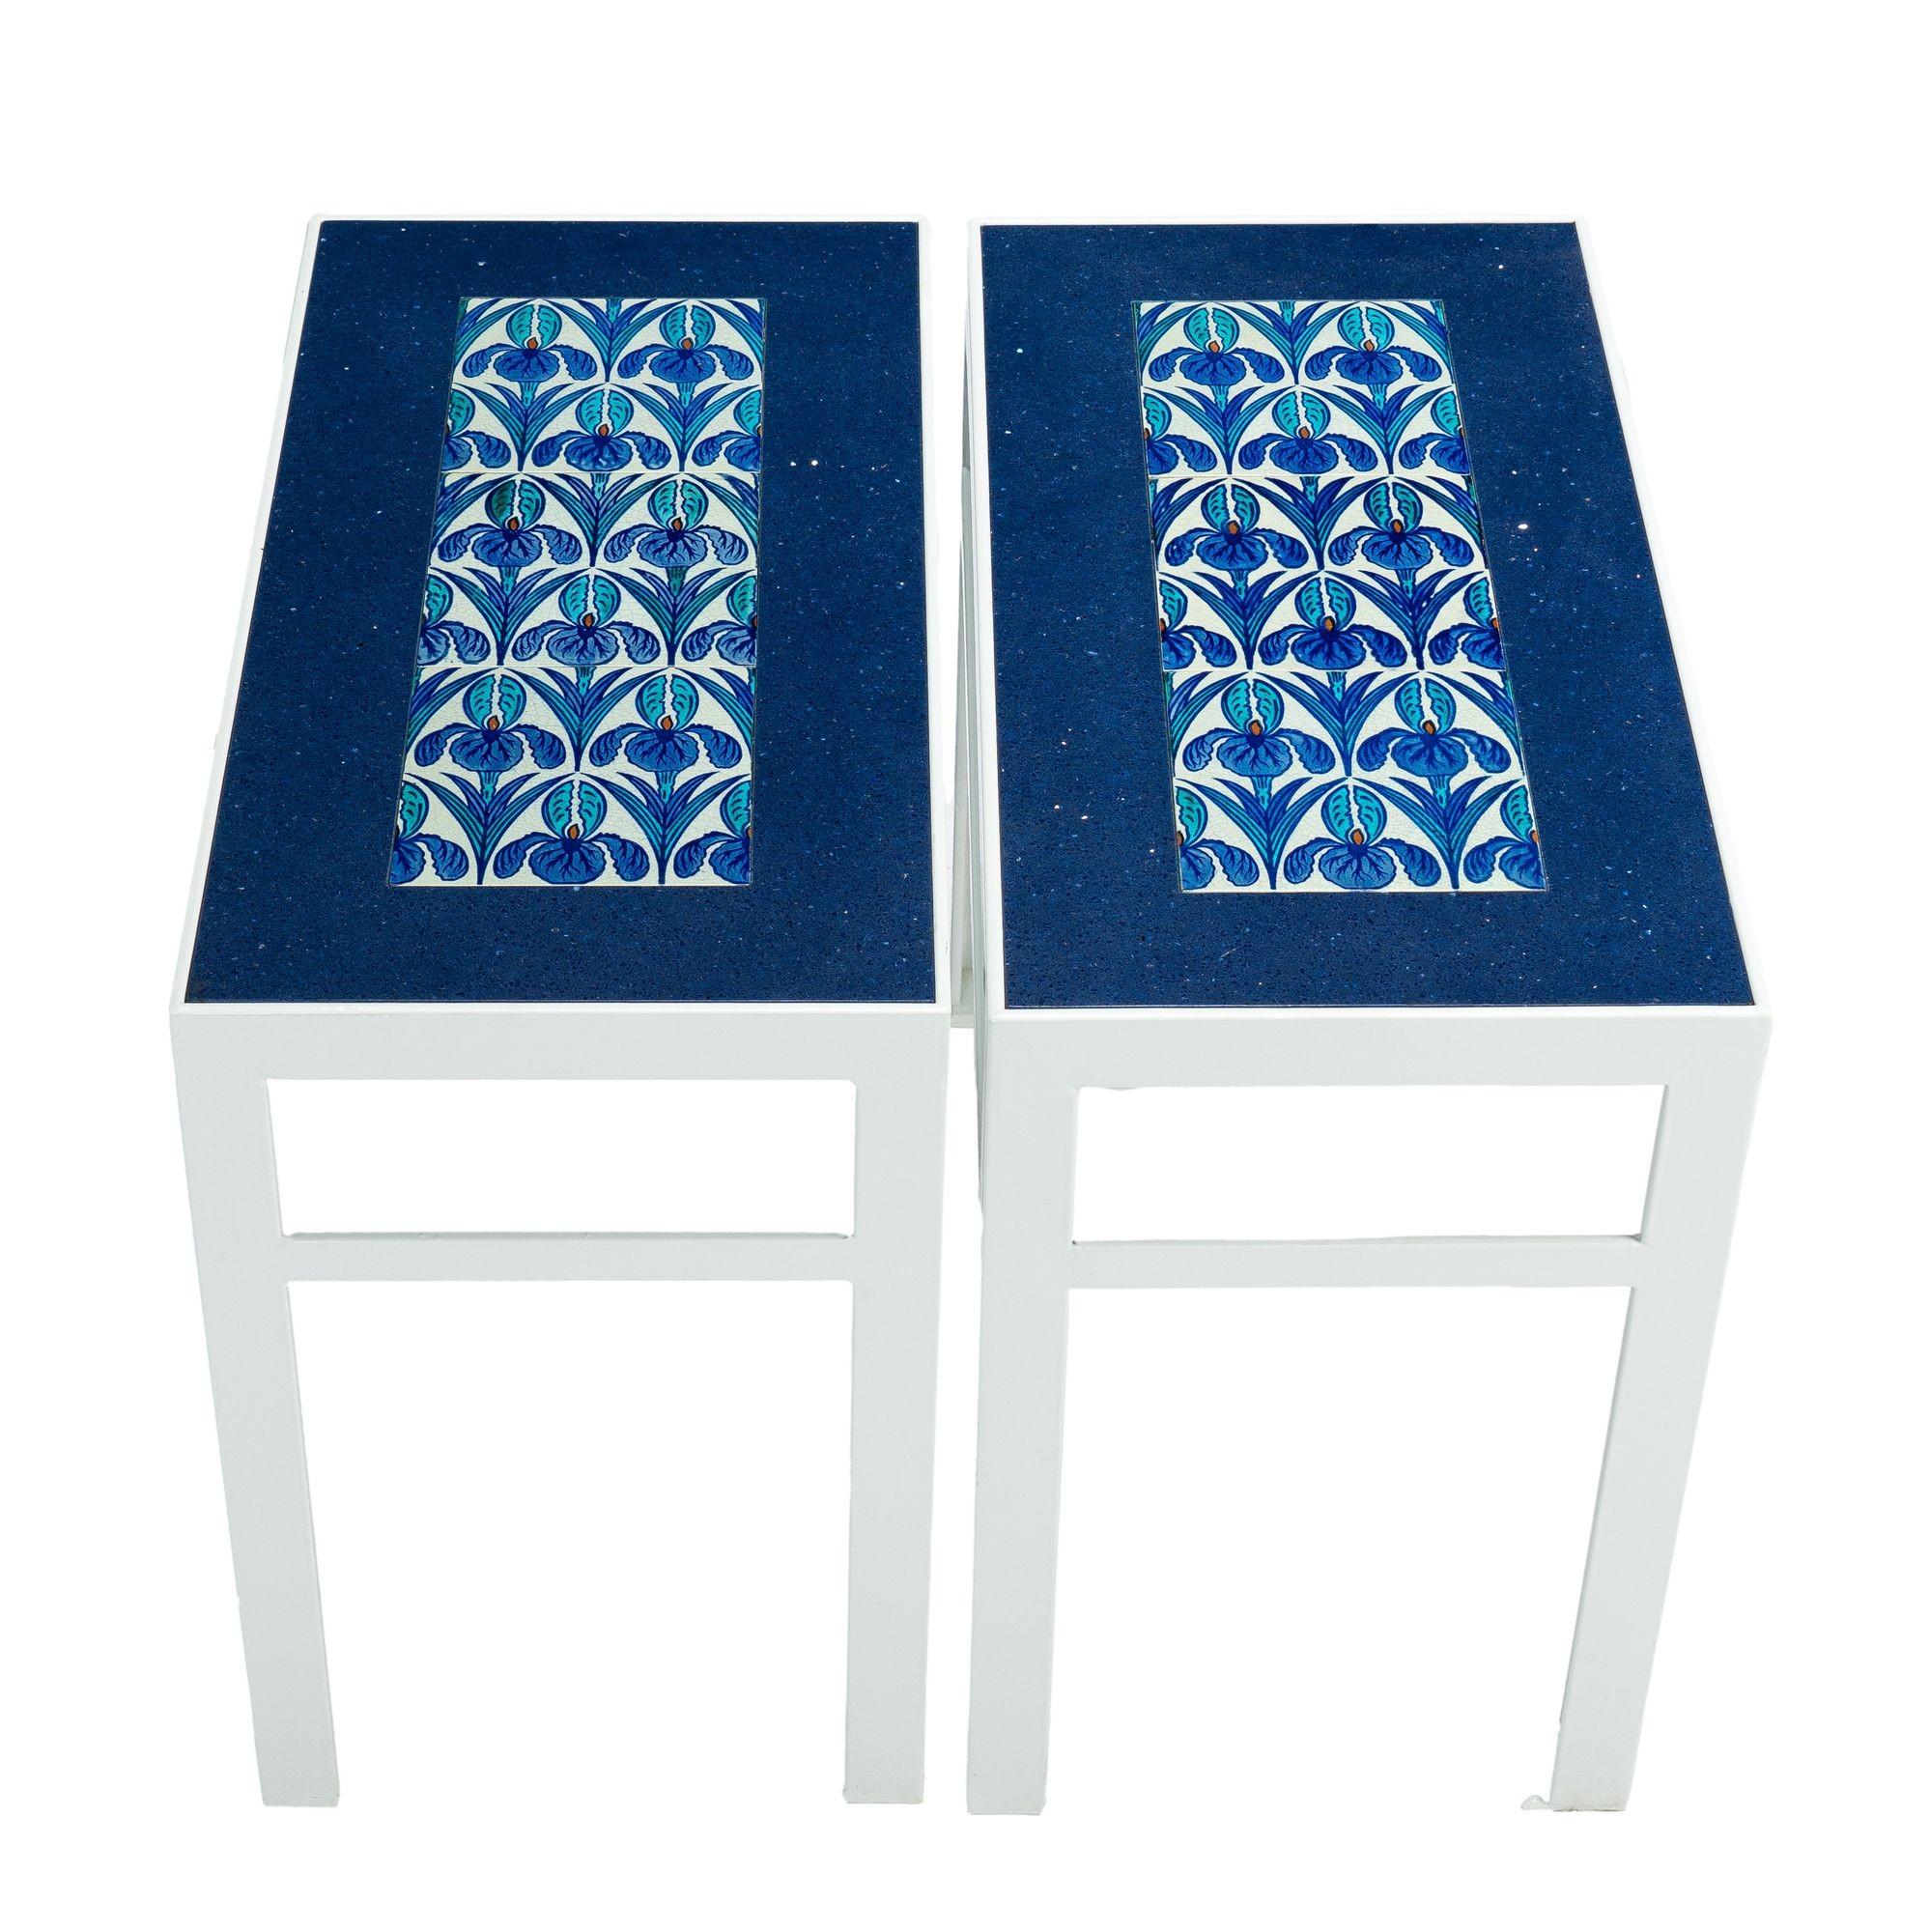 English Pair of custom marble & tile top tables with Maw & Co tiles, c. 1880-90 For Sale